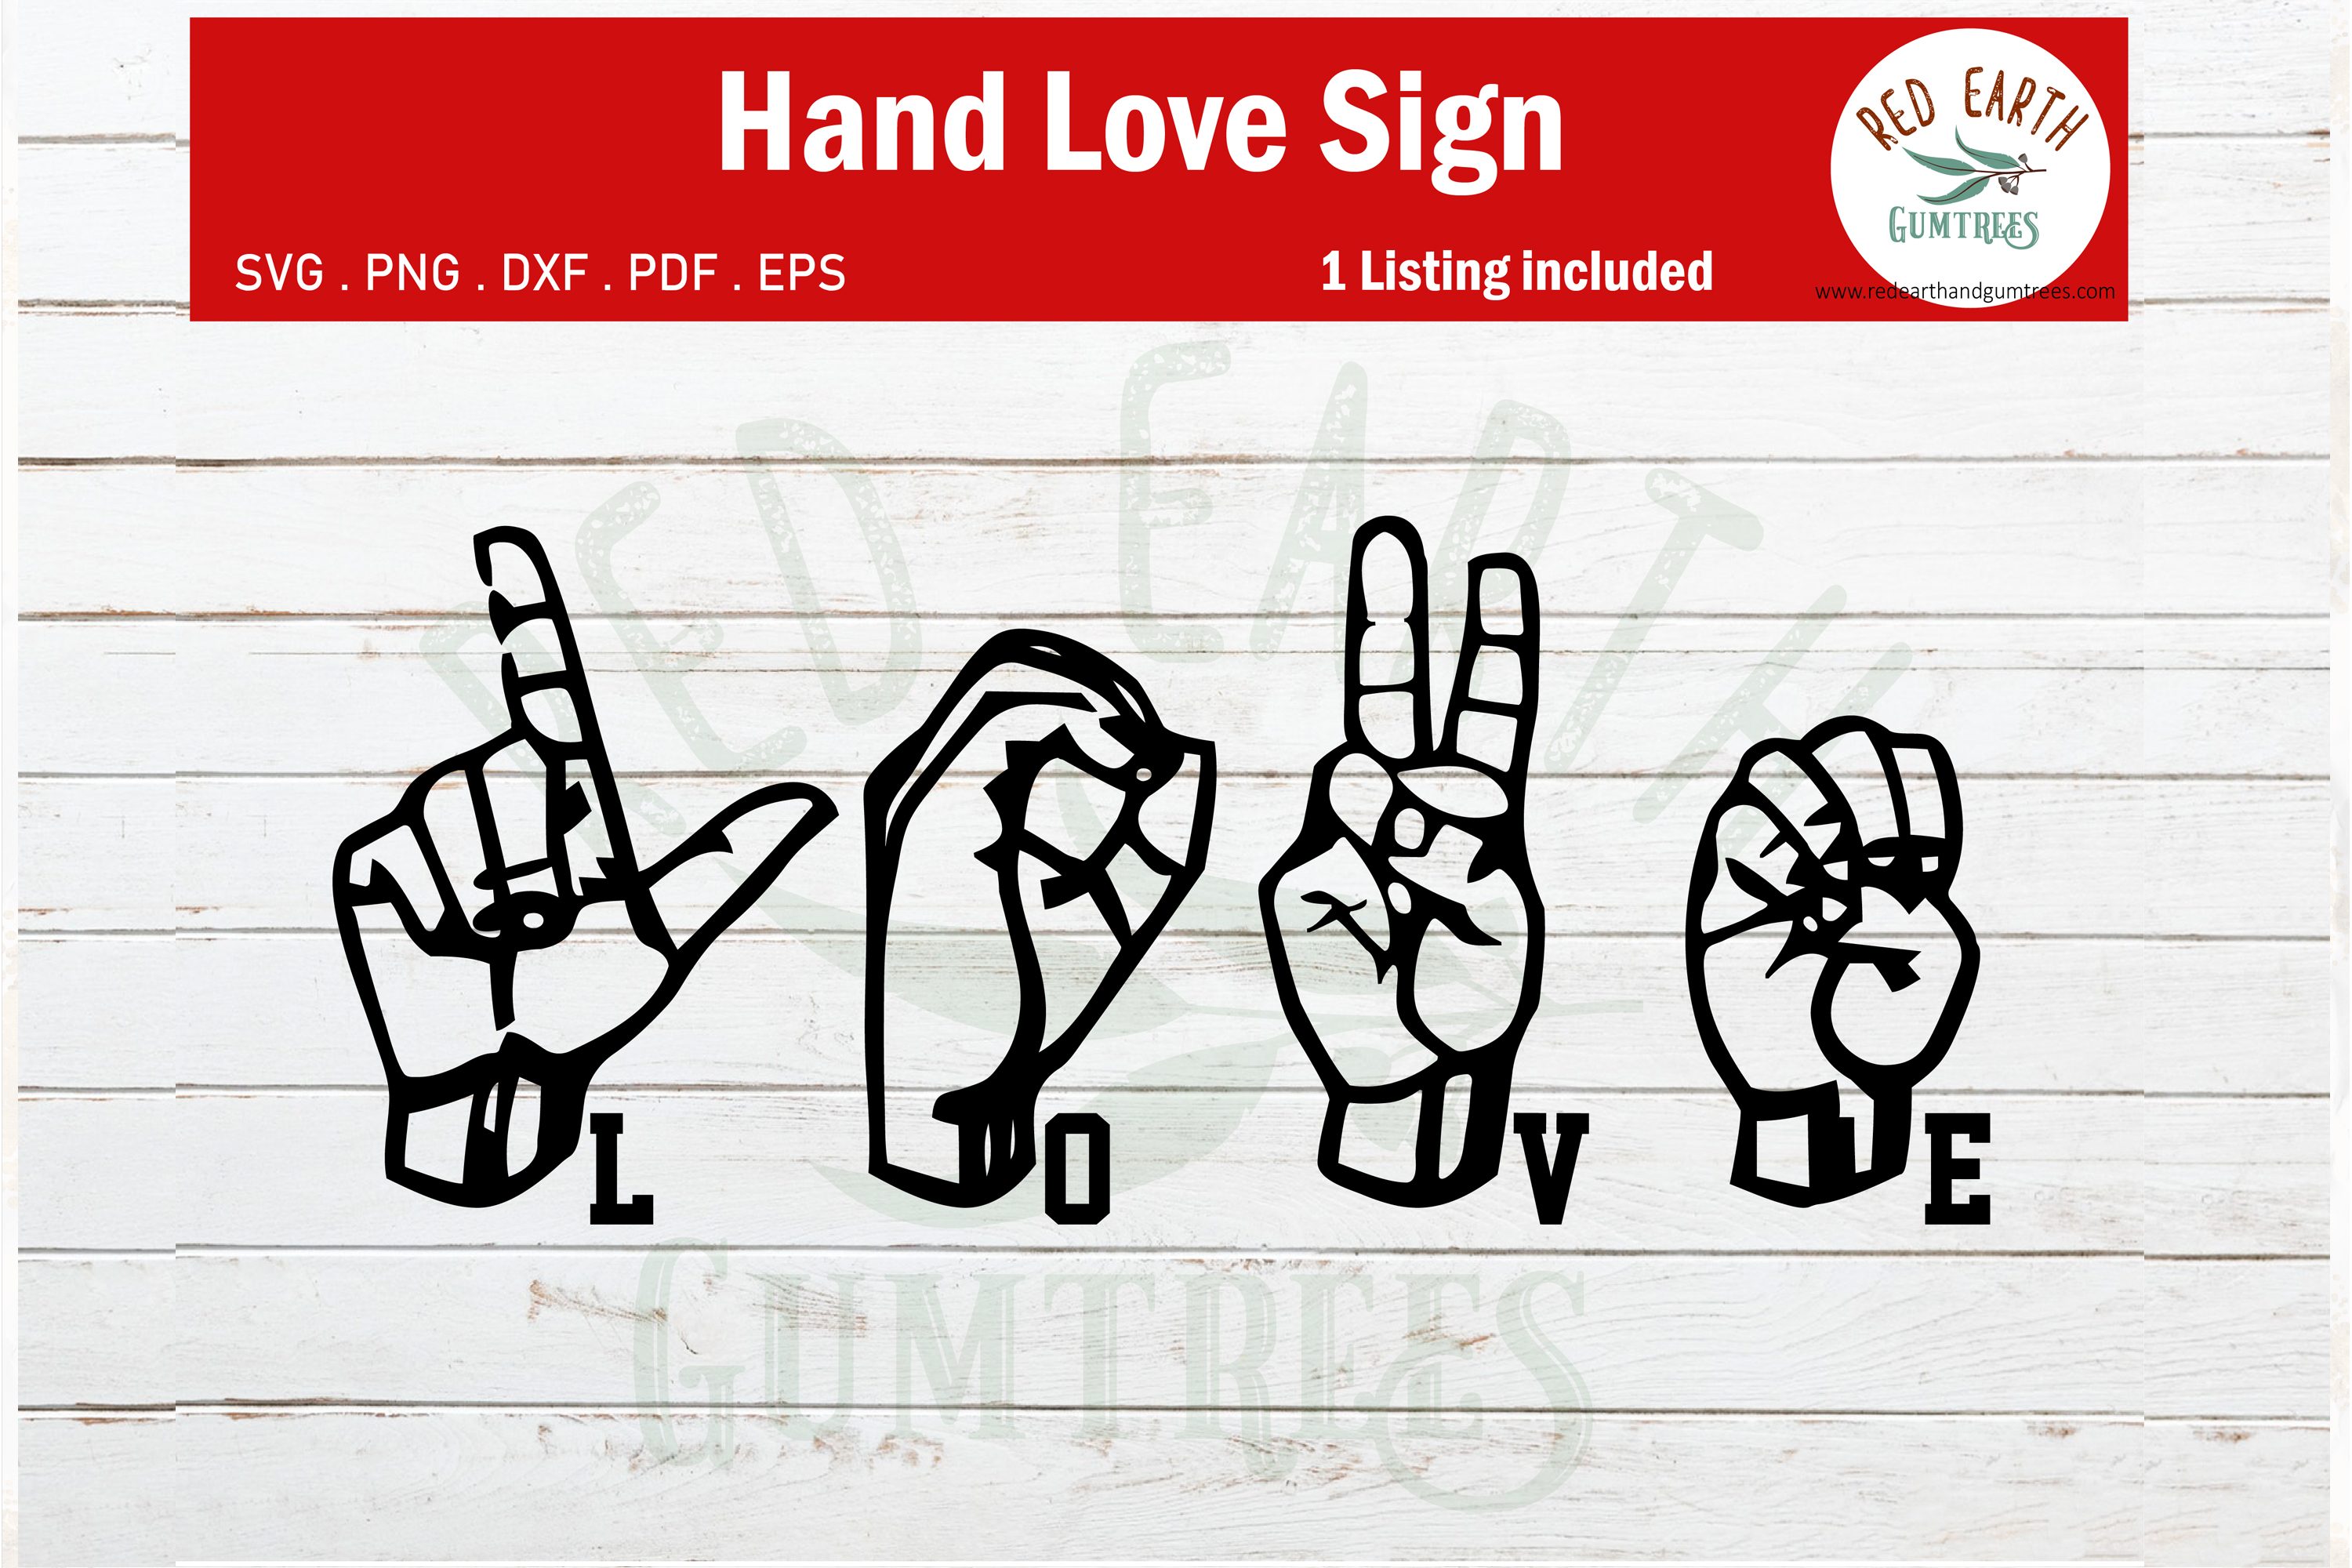 Love hand sign language, love sign language SVG DXF,EPS,PNG